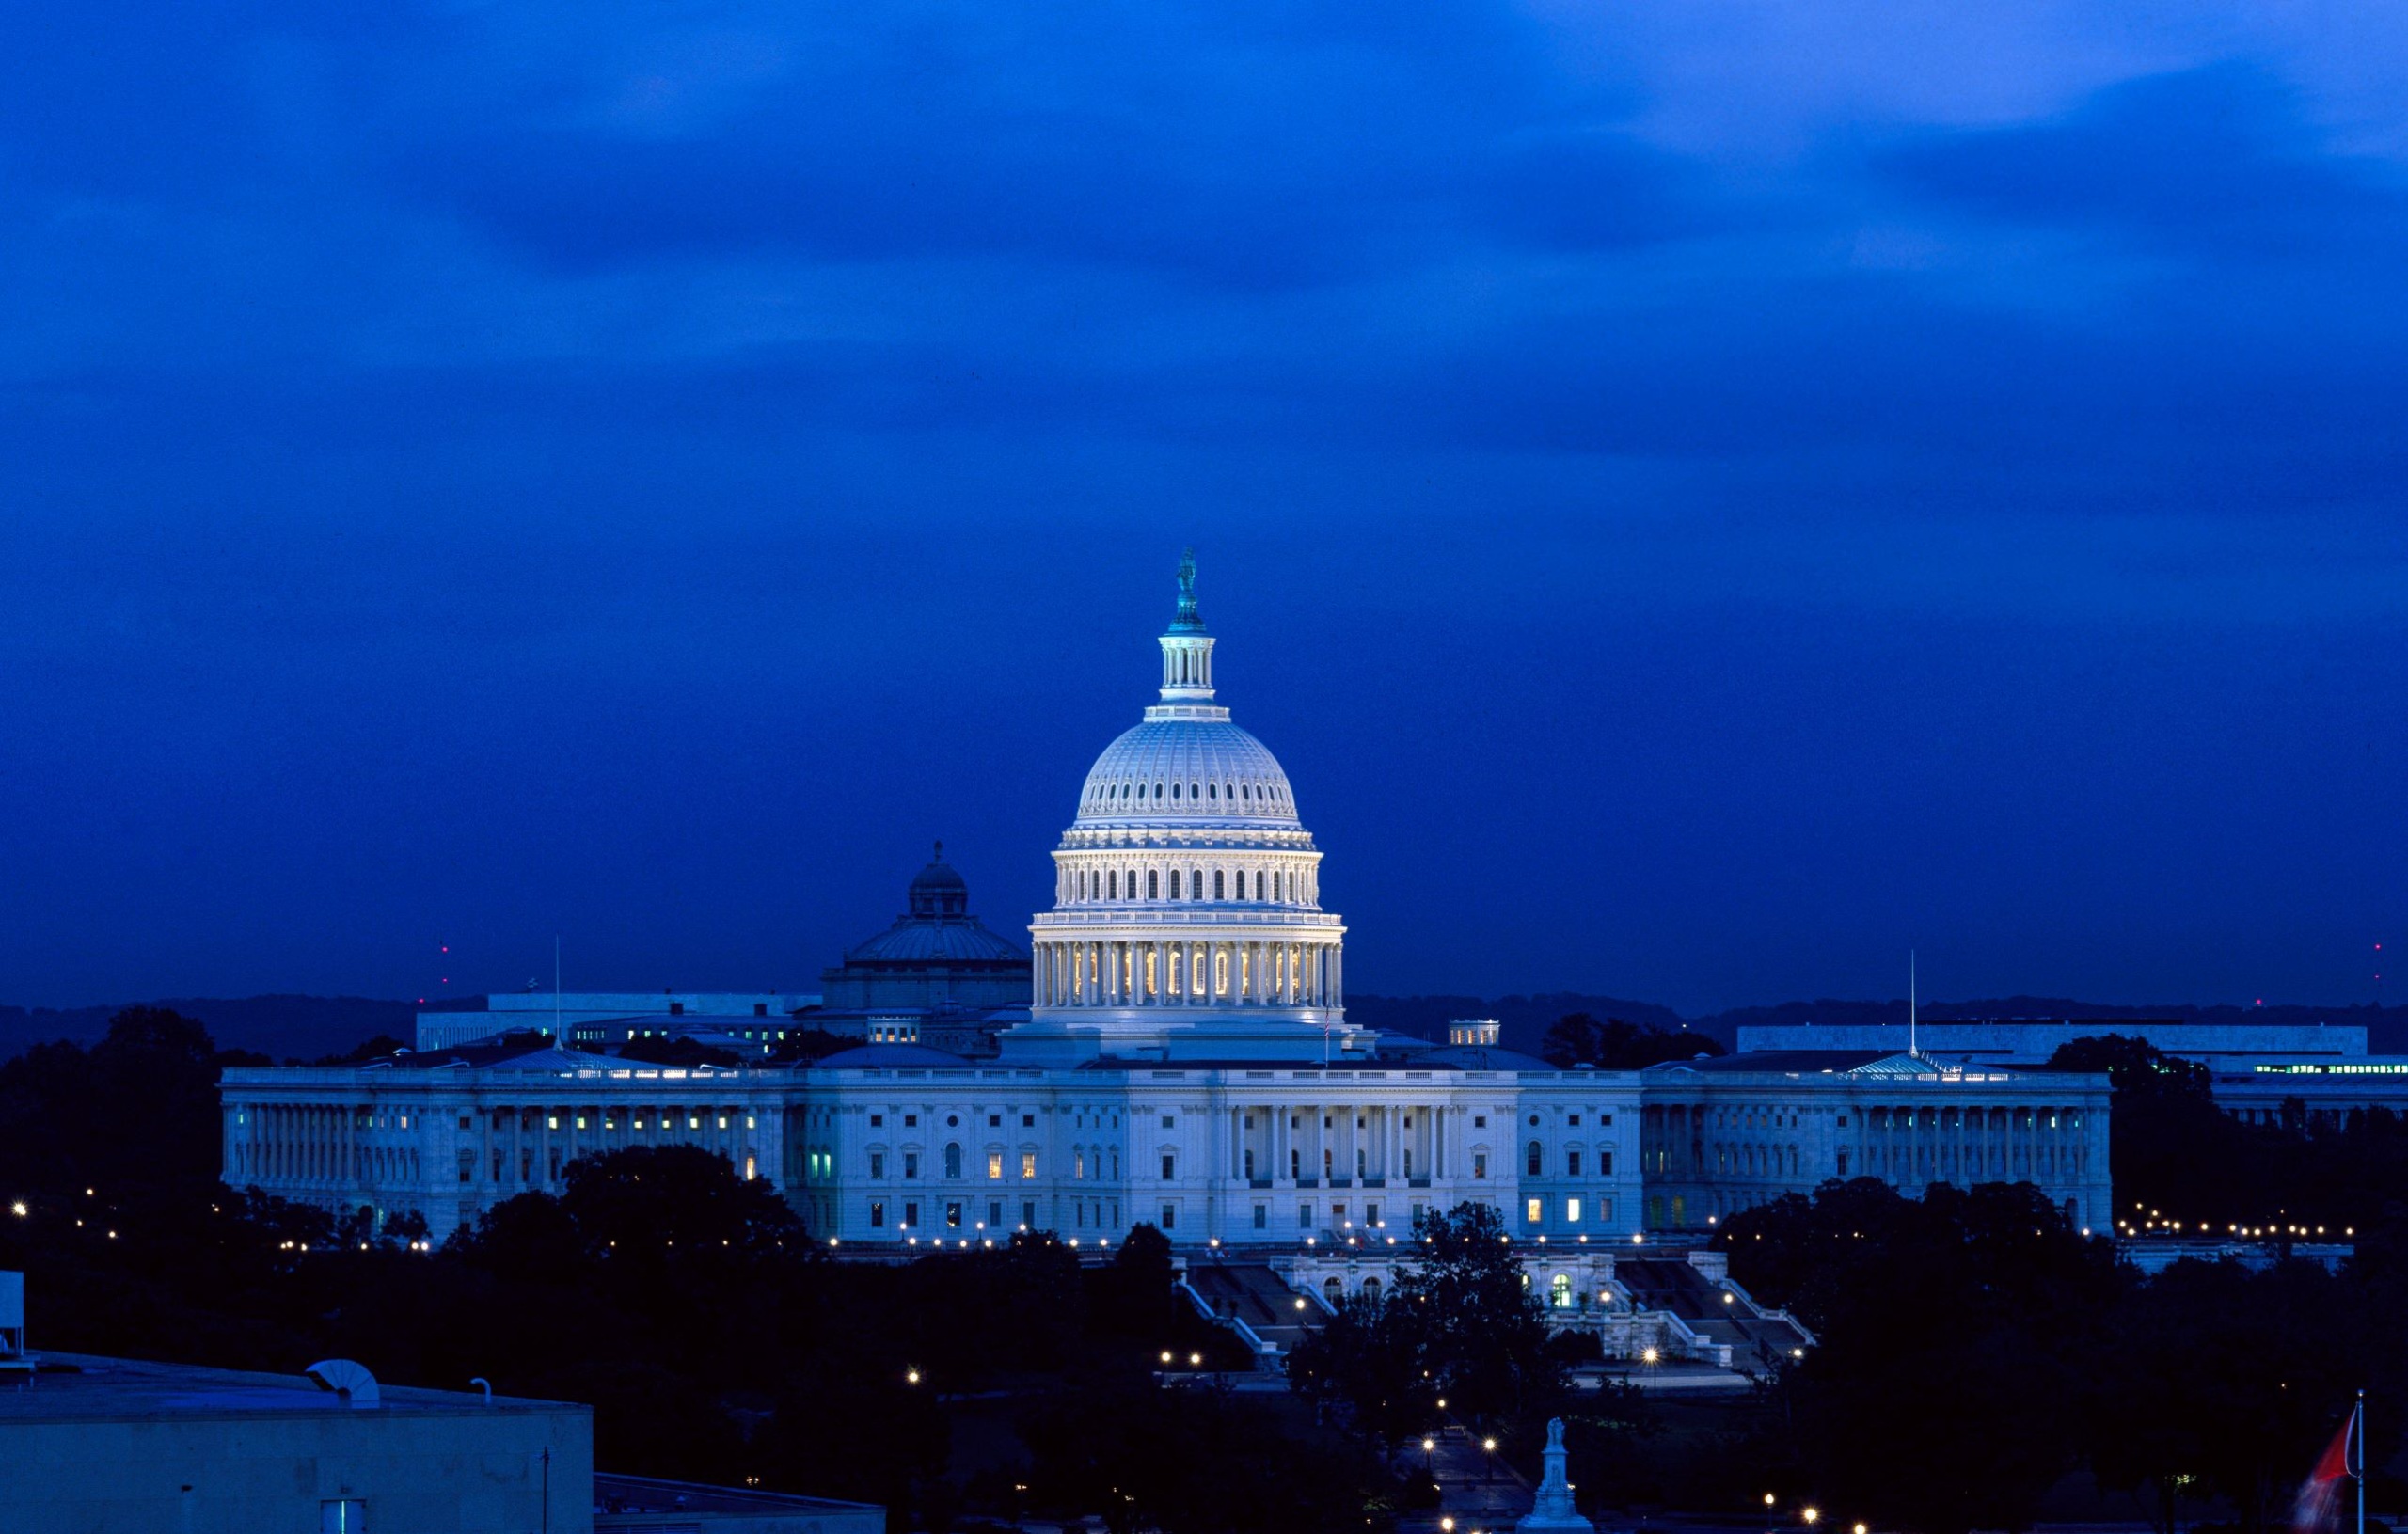 The US Capitol building at night.